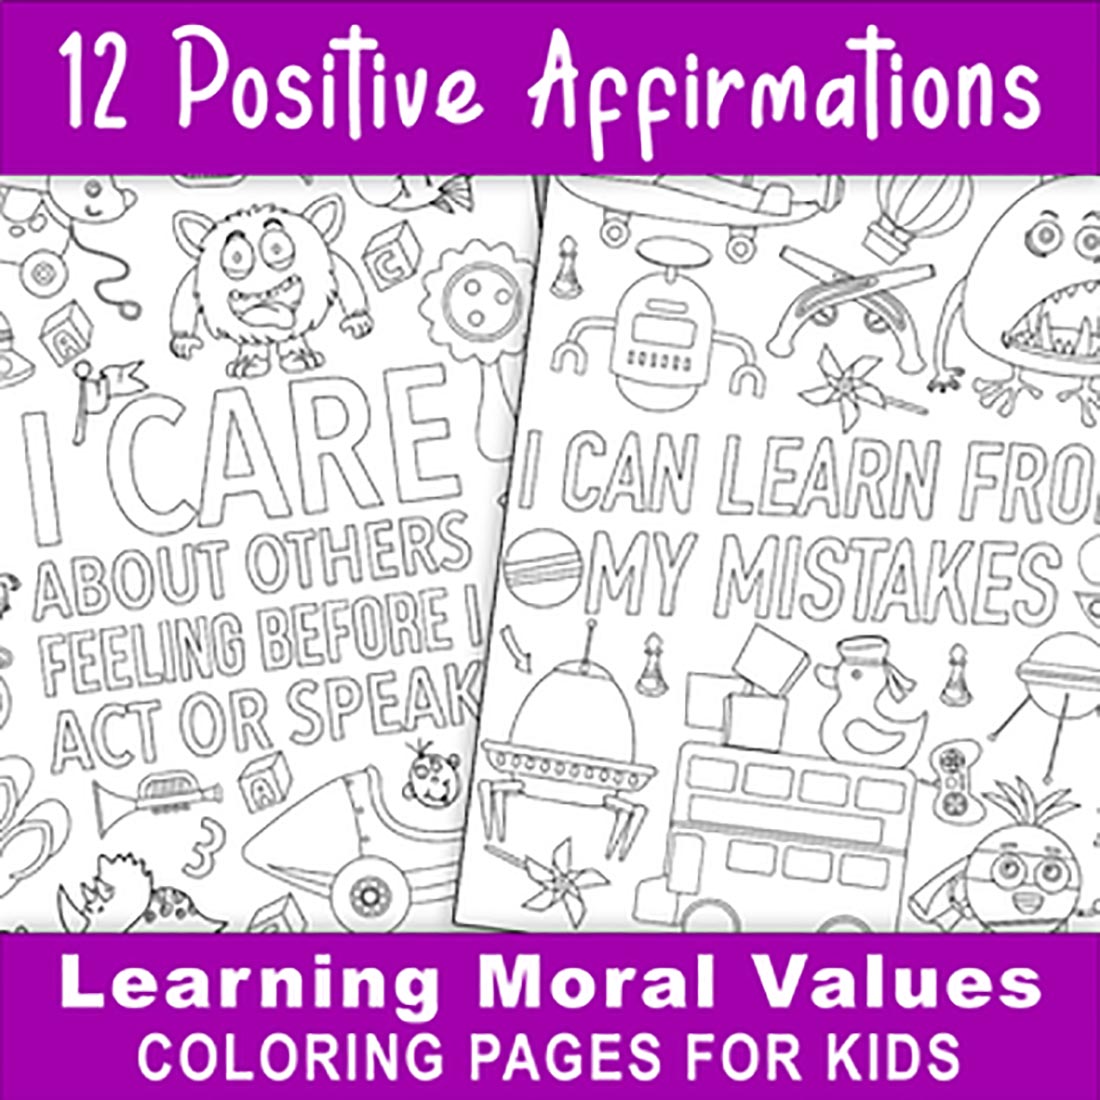 12 Positive Affirmation Colouring Pages for Kids - Learning Moral Values preview image.